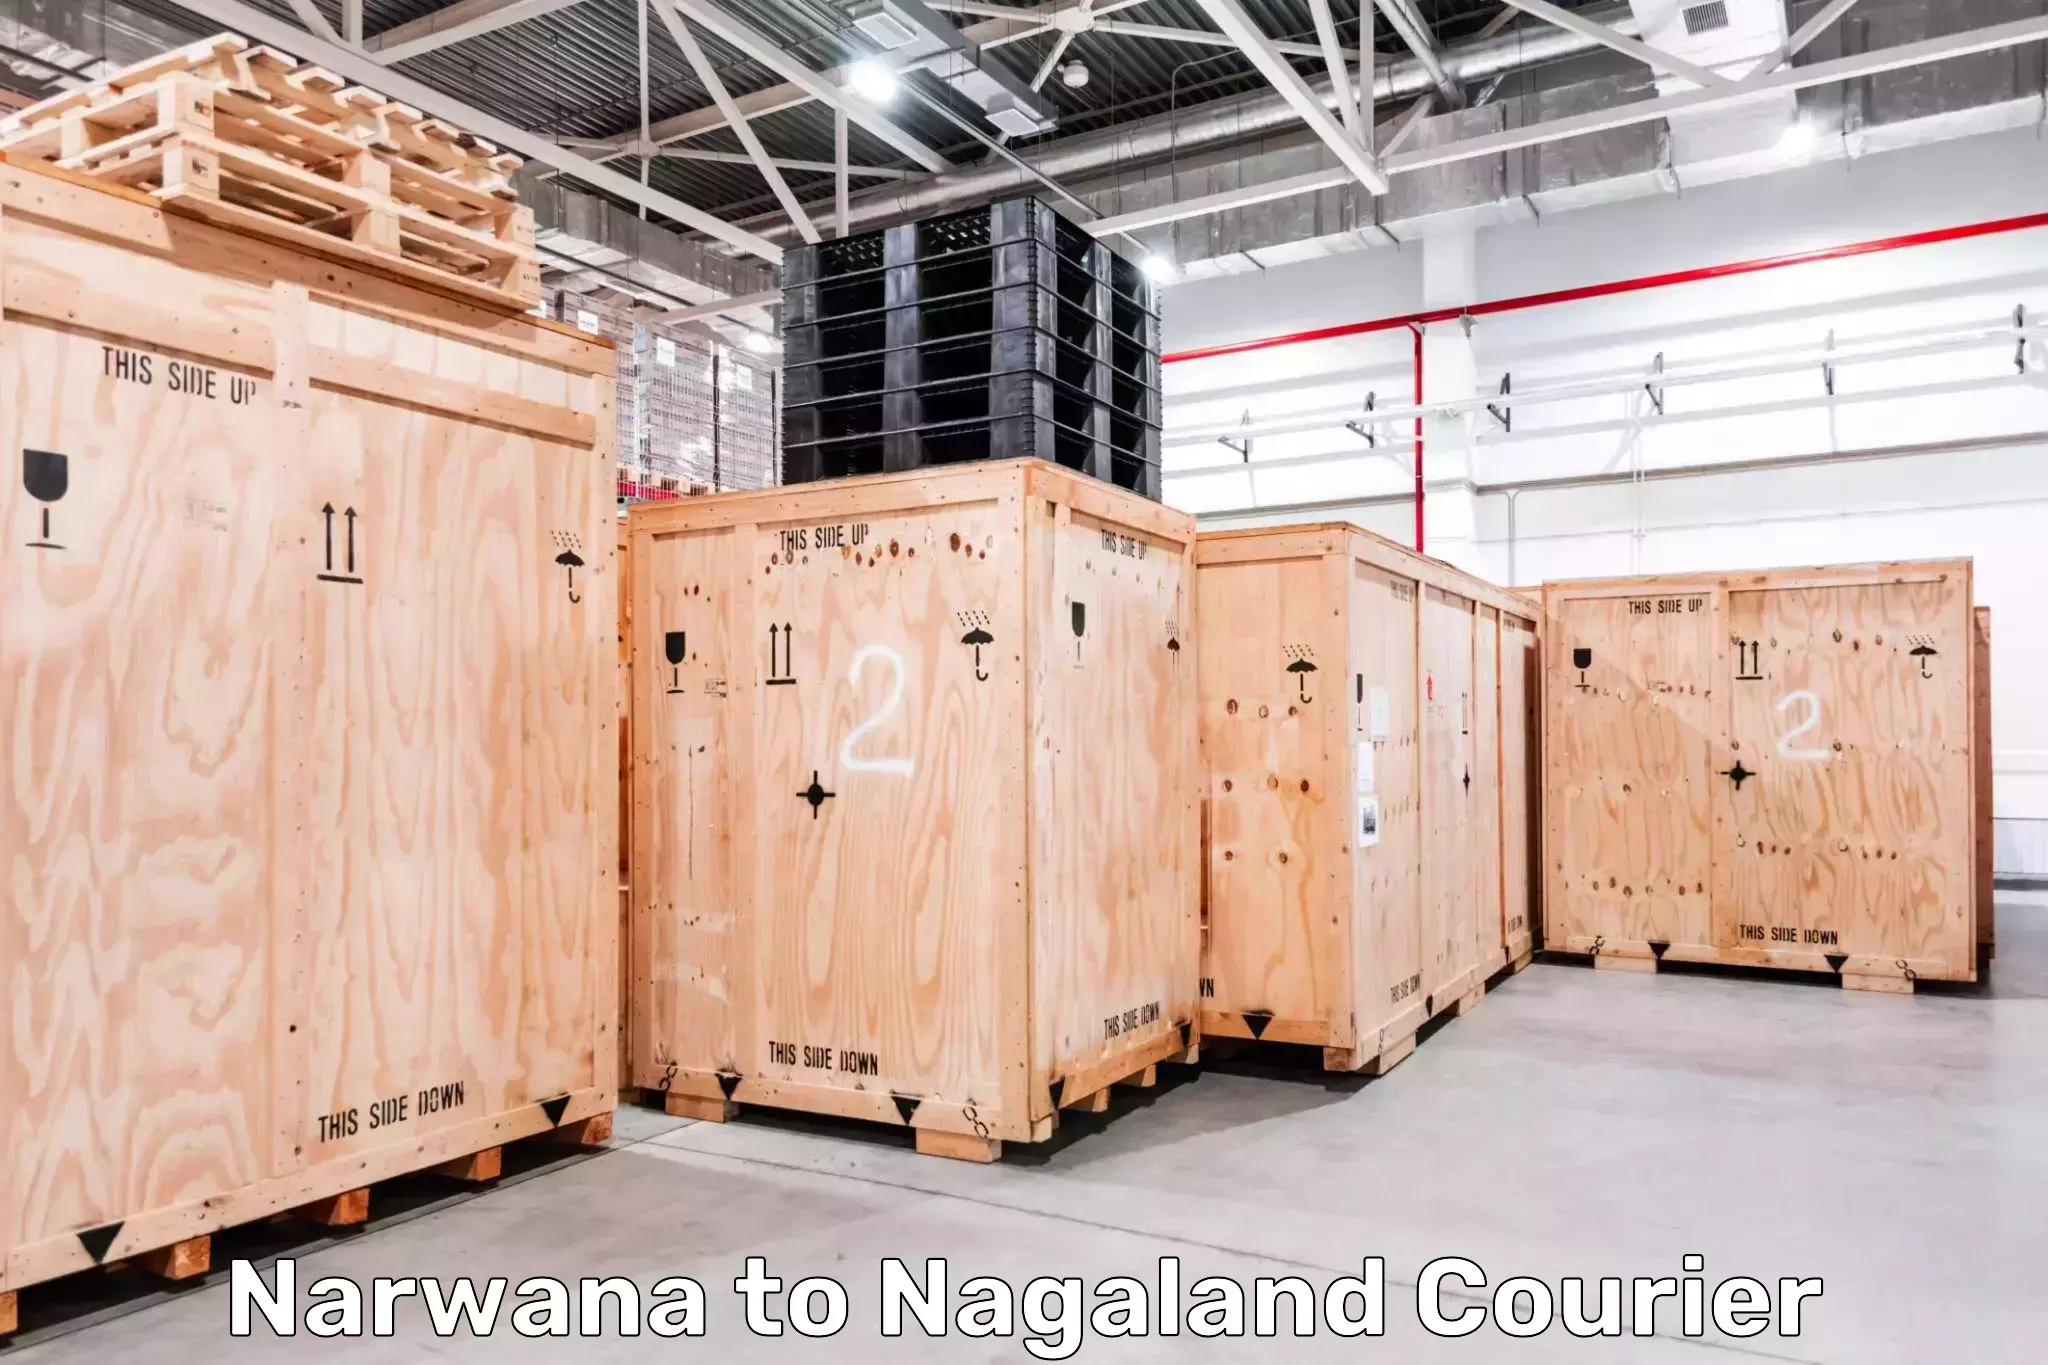 24-hour courier services in Narwana to Nagaland